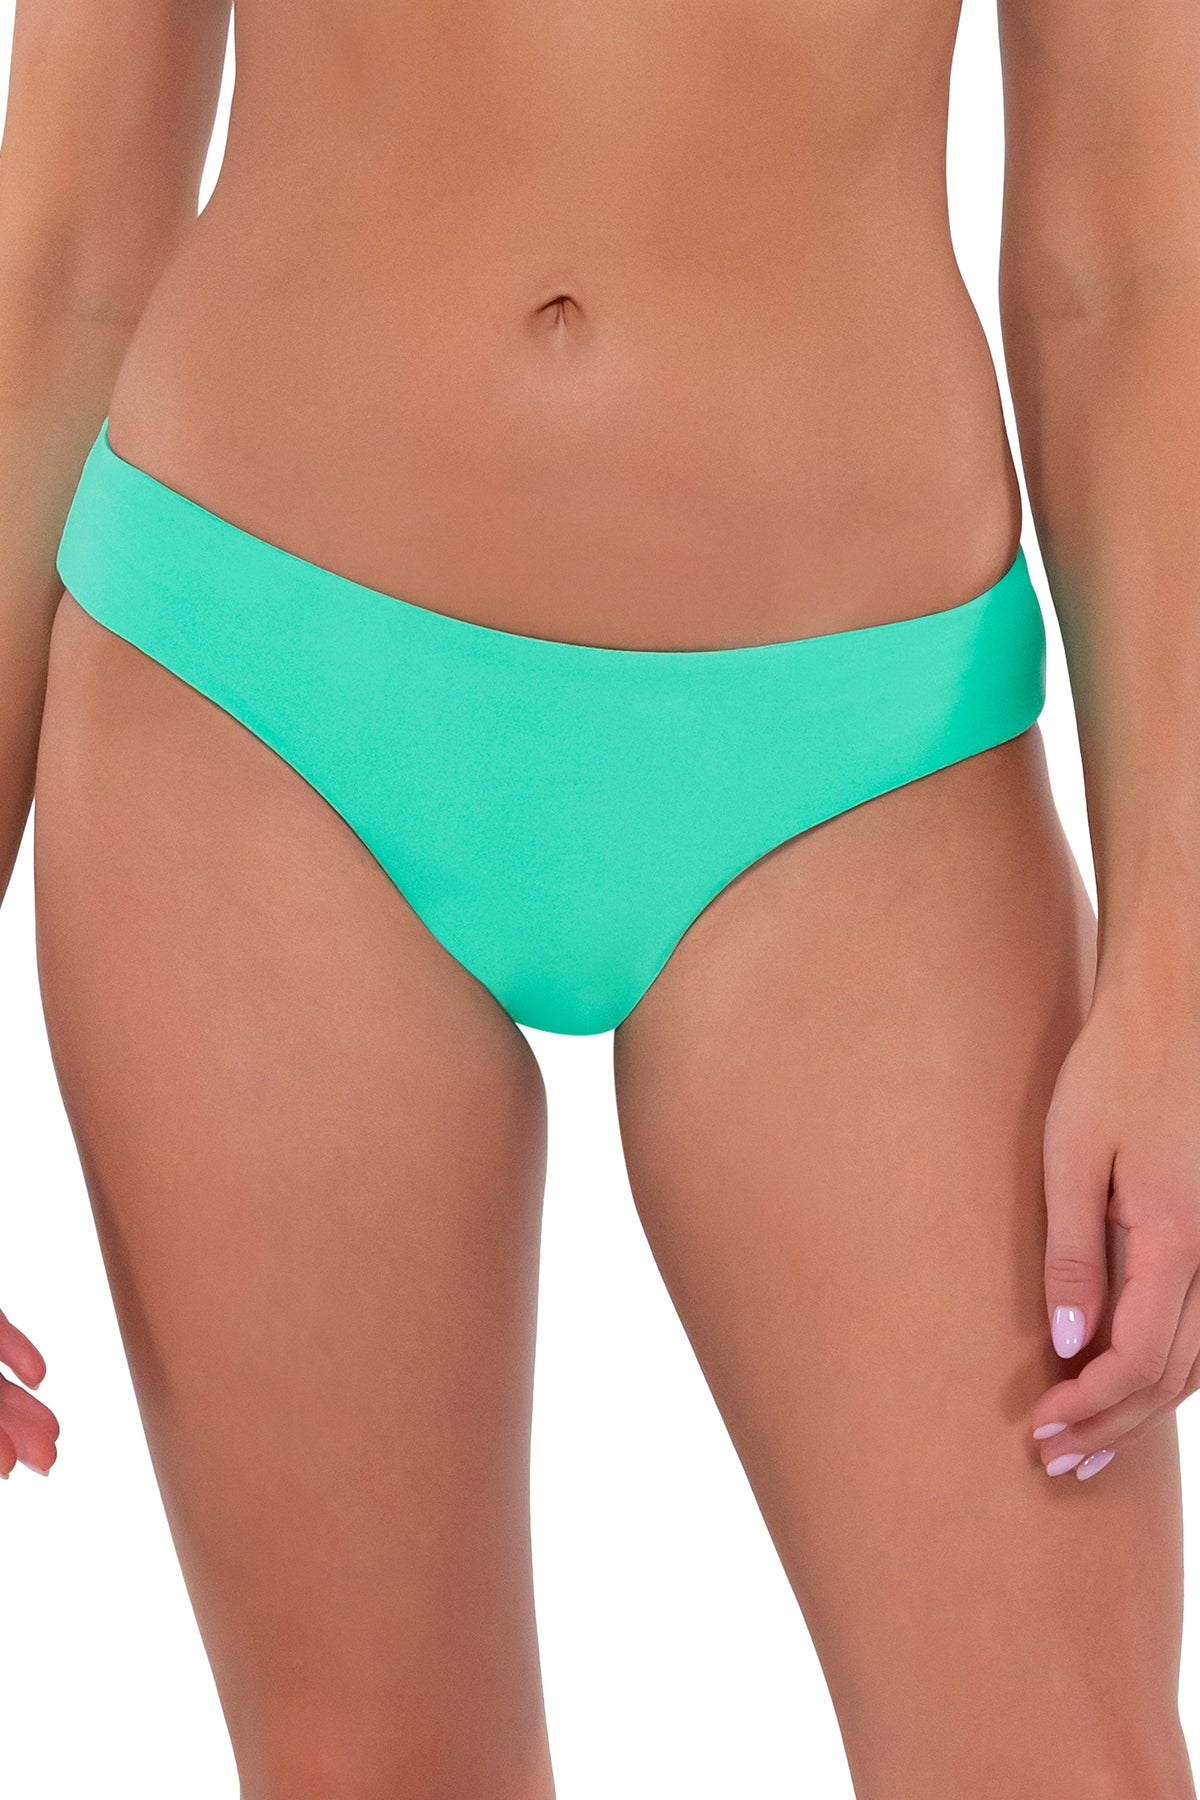 Front pose #1 of Daria wearing Sunsets Mint Alana Reversible Hipster Bottom